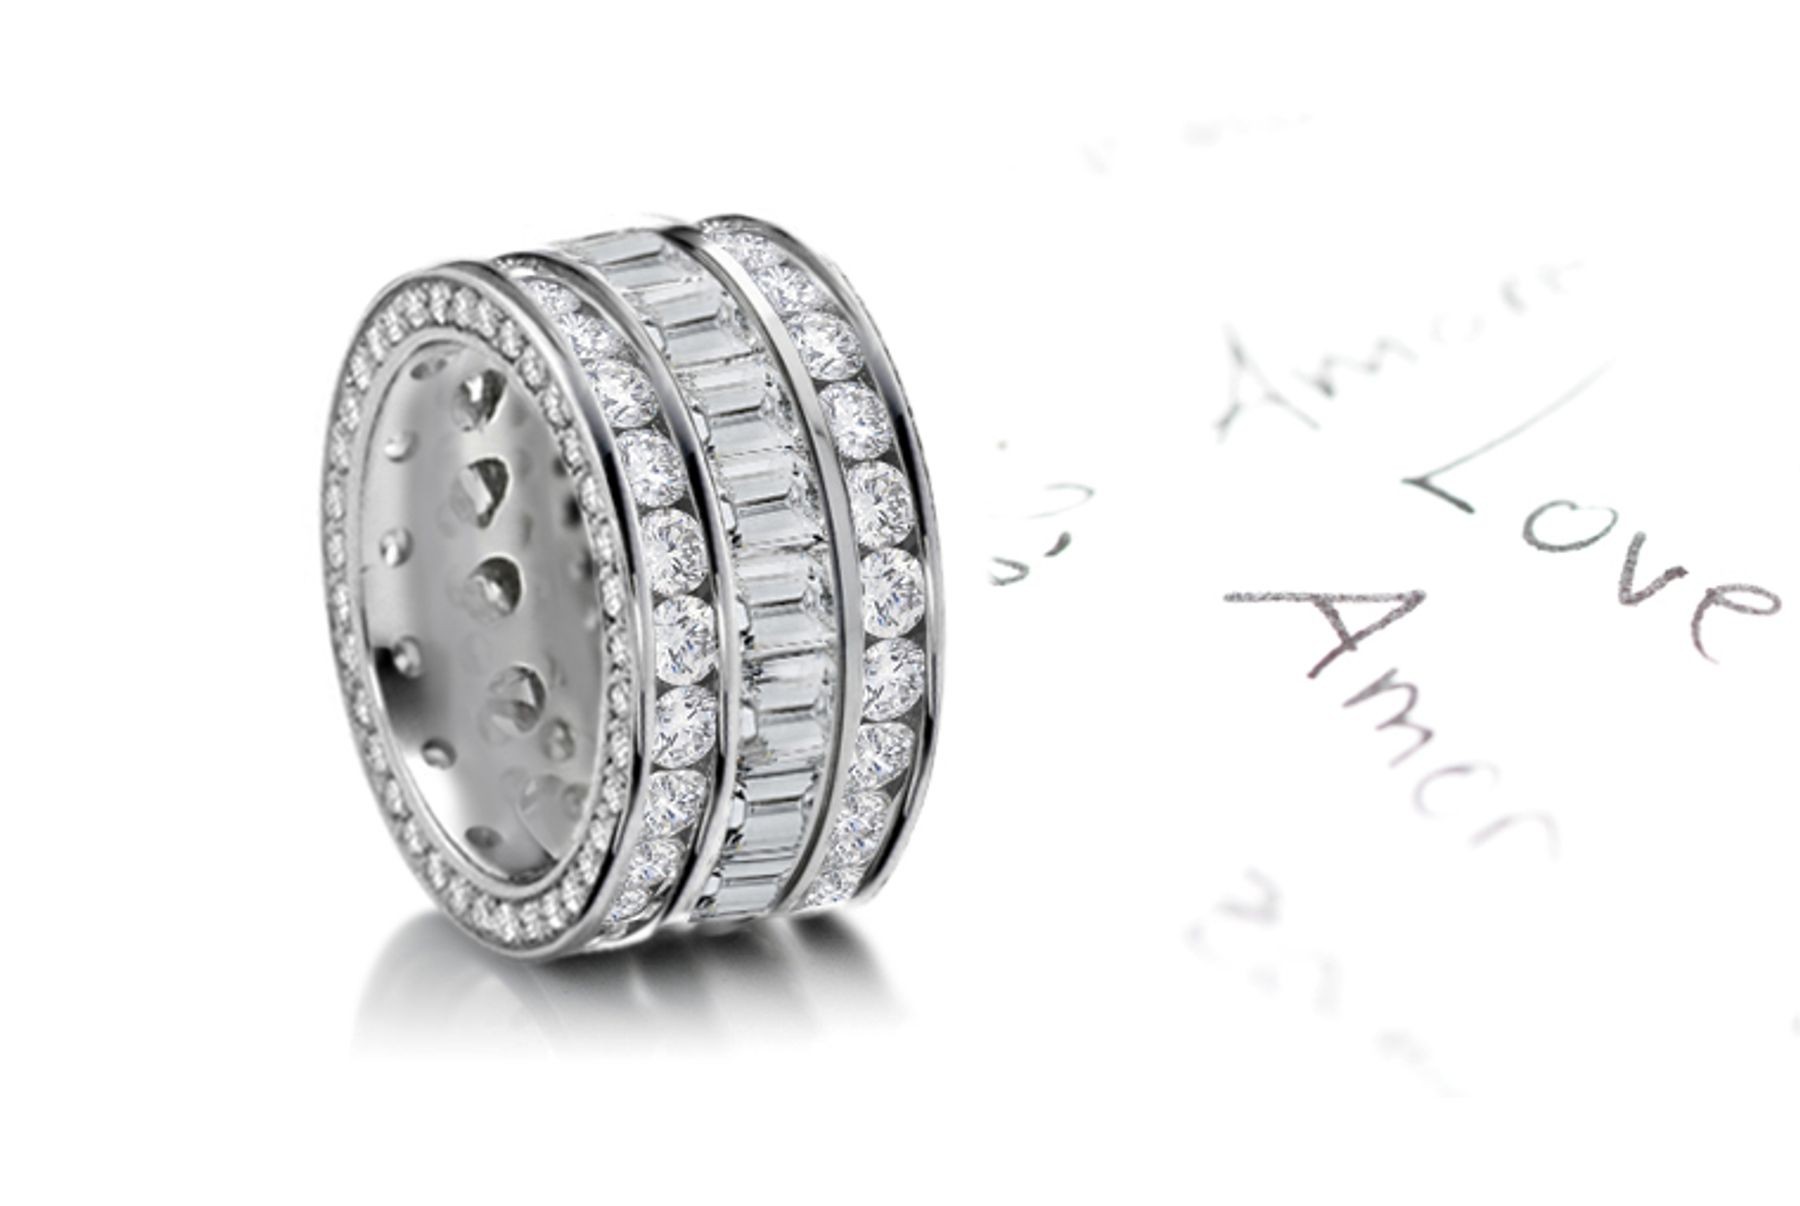 Tailor Designed Sparkler of Baguette Cut Diamonds bordered by row of Asscher Cut Diamonds in 4.0 to 5.50 carats